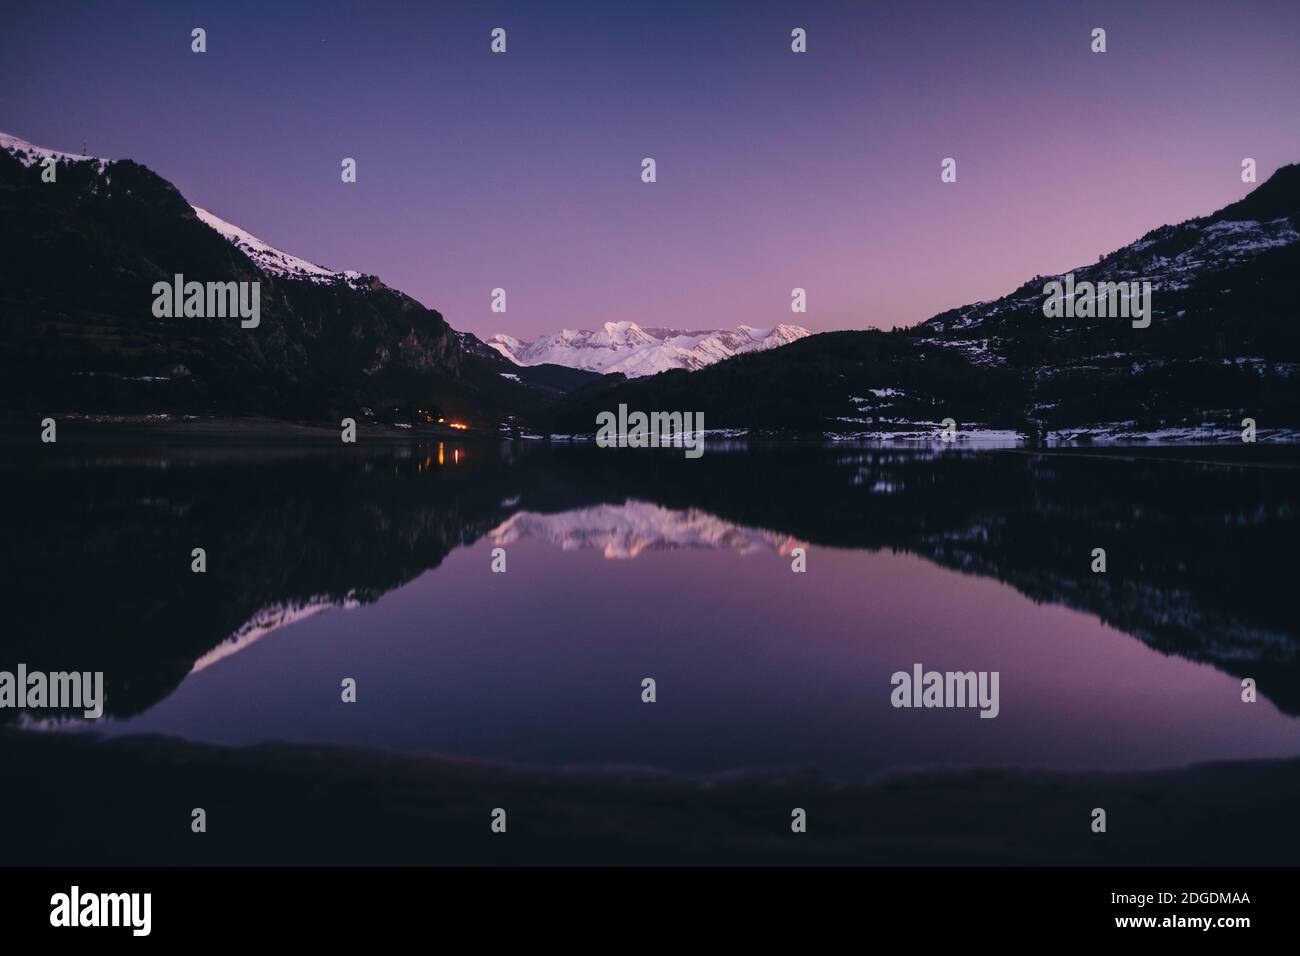 Scenic snowcapped mountain reflected on a lake during dusk in the Pyrenees, Sallent de Gallego, Huesca, Spain Stock Photo